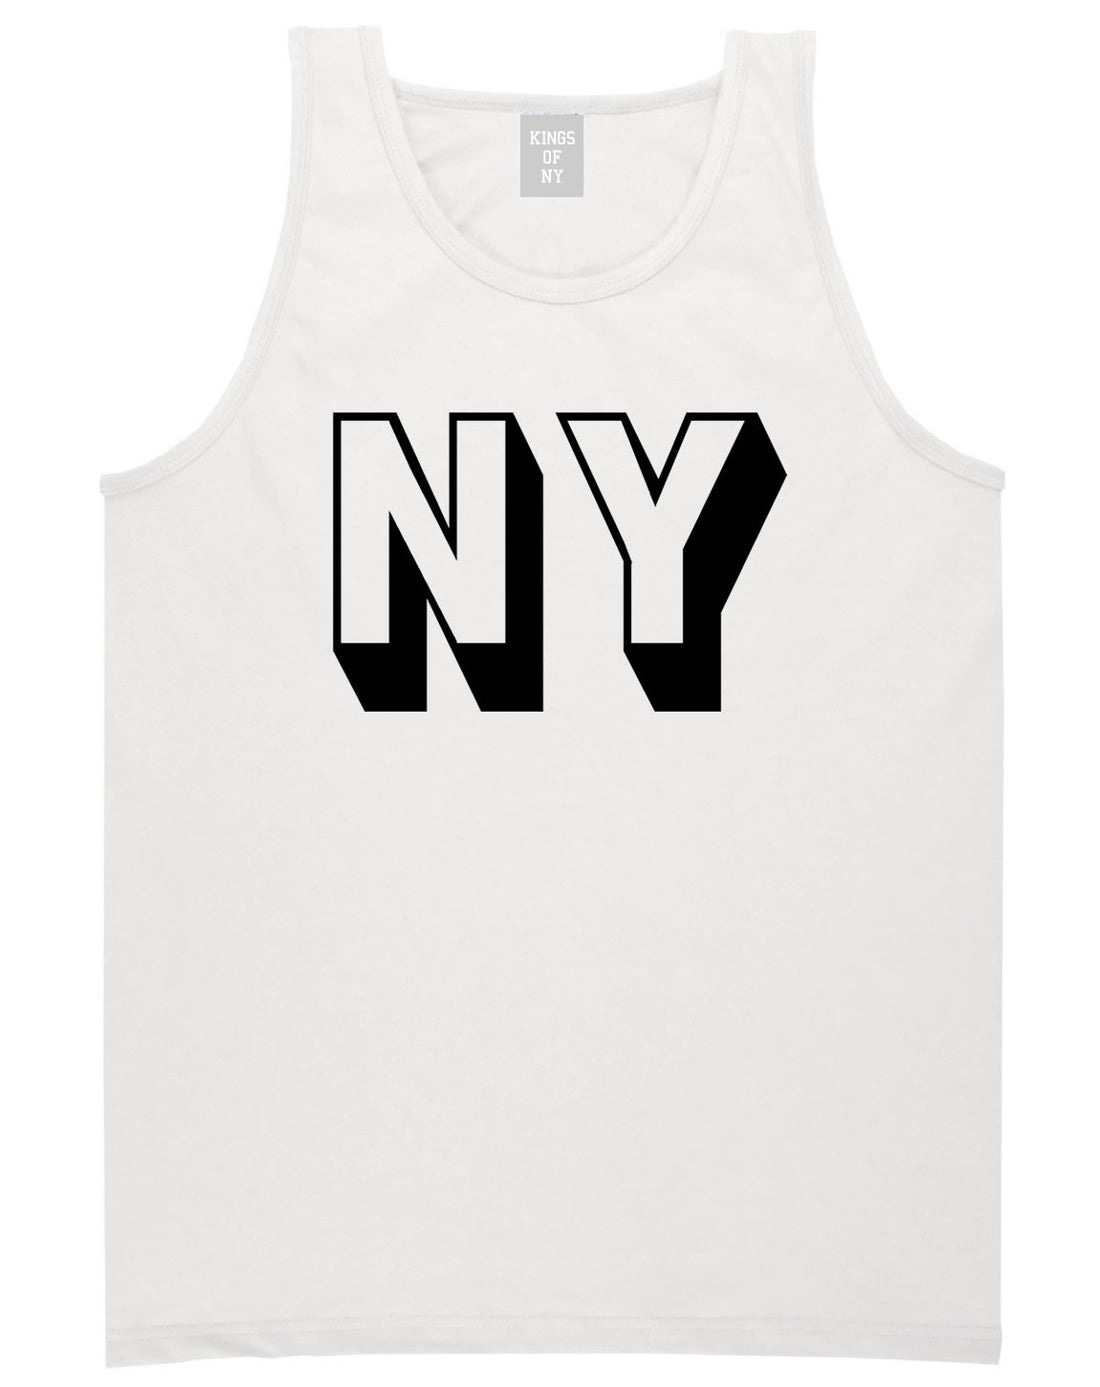 NY Block Letter New York Tank Top in White By Kings Of NY